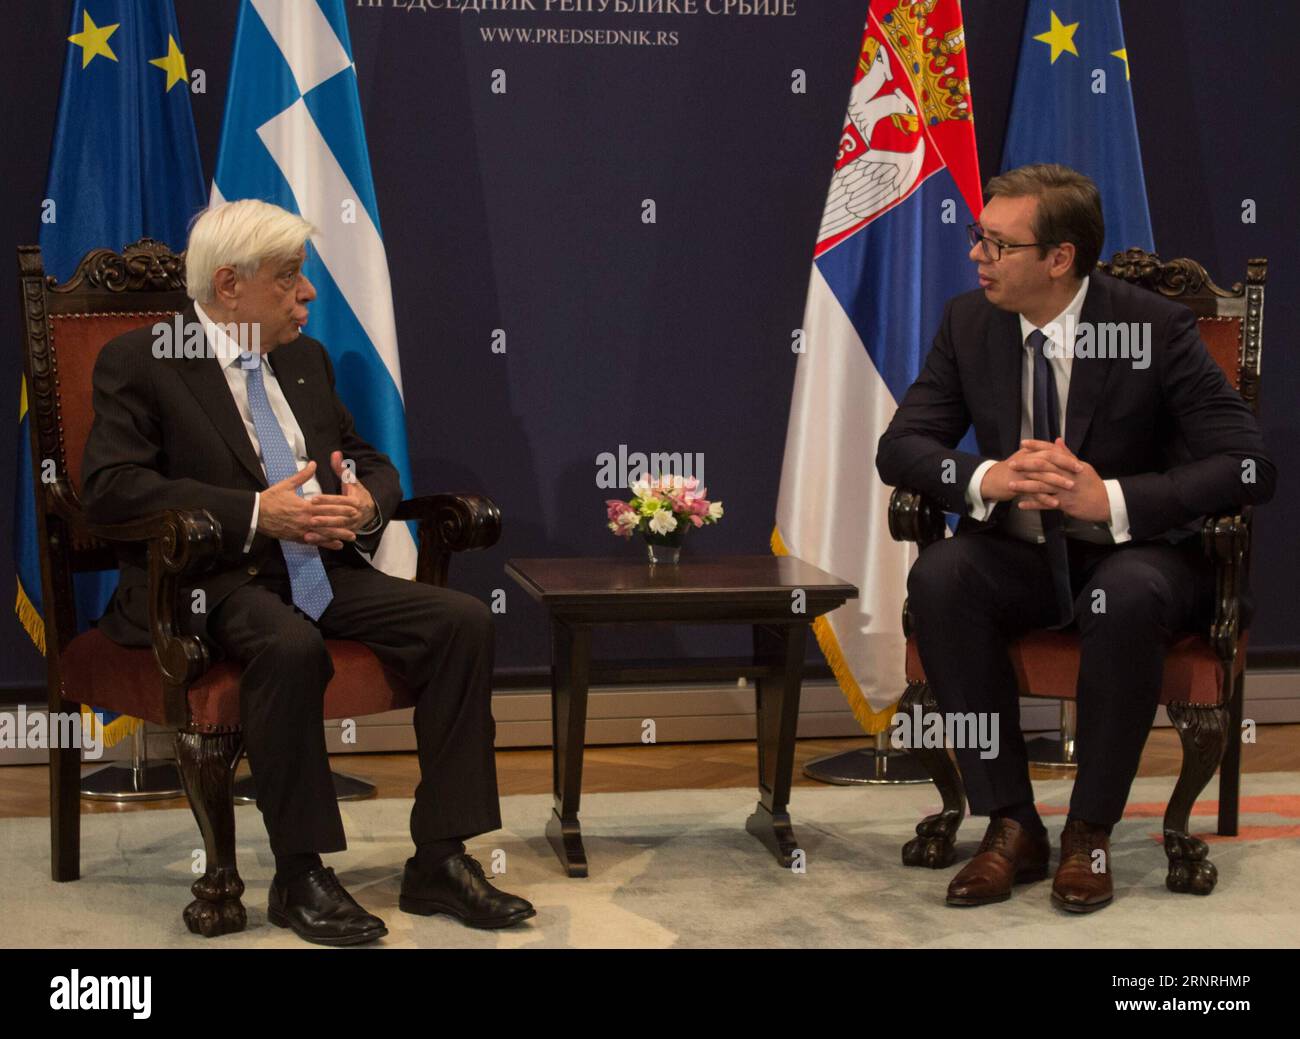 (171002) -- BELGRADE, Oct. 2, 2017 -- Visiting Greek President Prokopis Pavlopoulos (L) talks to his Serbian counterpart Aleksandar Vucic in Belgrade, Serbia, Oct. 2, 2017. Greece will support Serbia as well as all other Balkan countries who wish to become part of the European Union (EU), but these countries must respect international right, as well as European principles and heritage, said Greek President Prokopis Pavlopoulos during his visit to Serbia on Monday. ) SERBIA-BELGRADE-GREECE-PRESIDENT-VISIT NemanjaxCabric PUBLICATIONxNOTxINxCHN Stock Photo